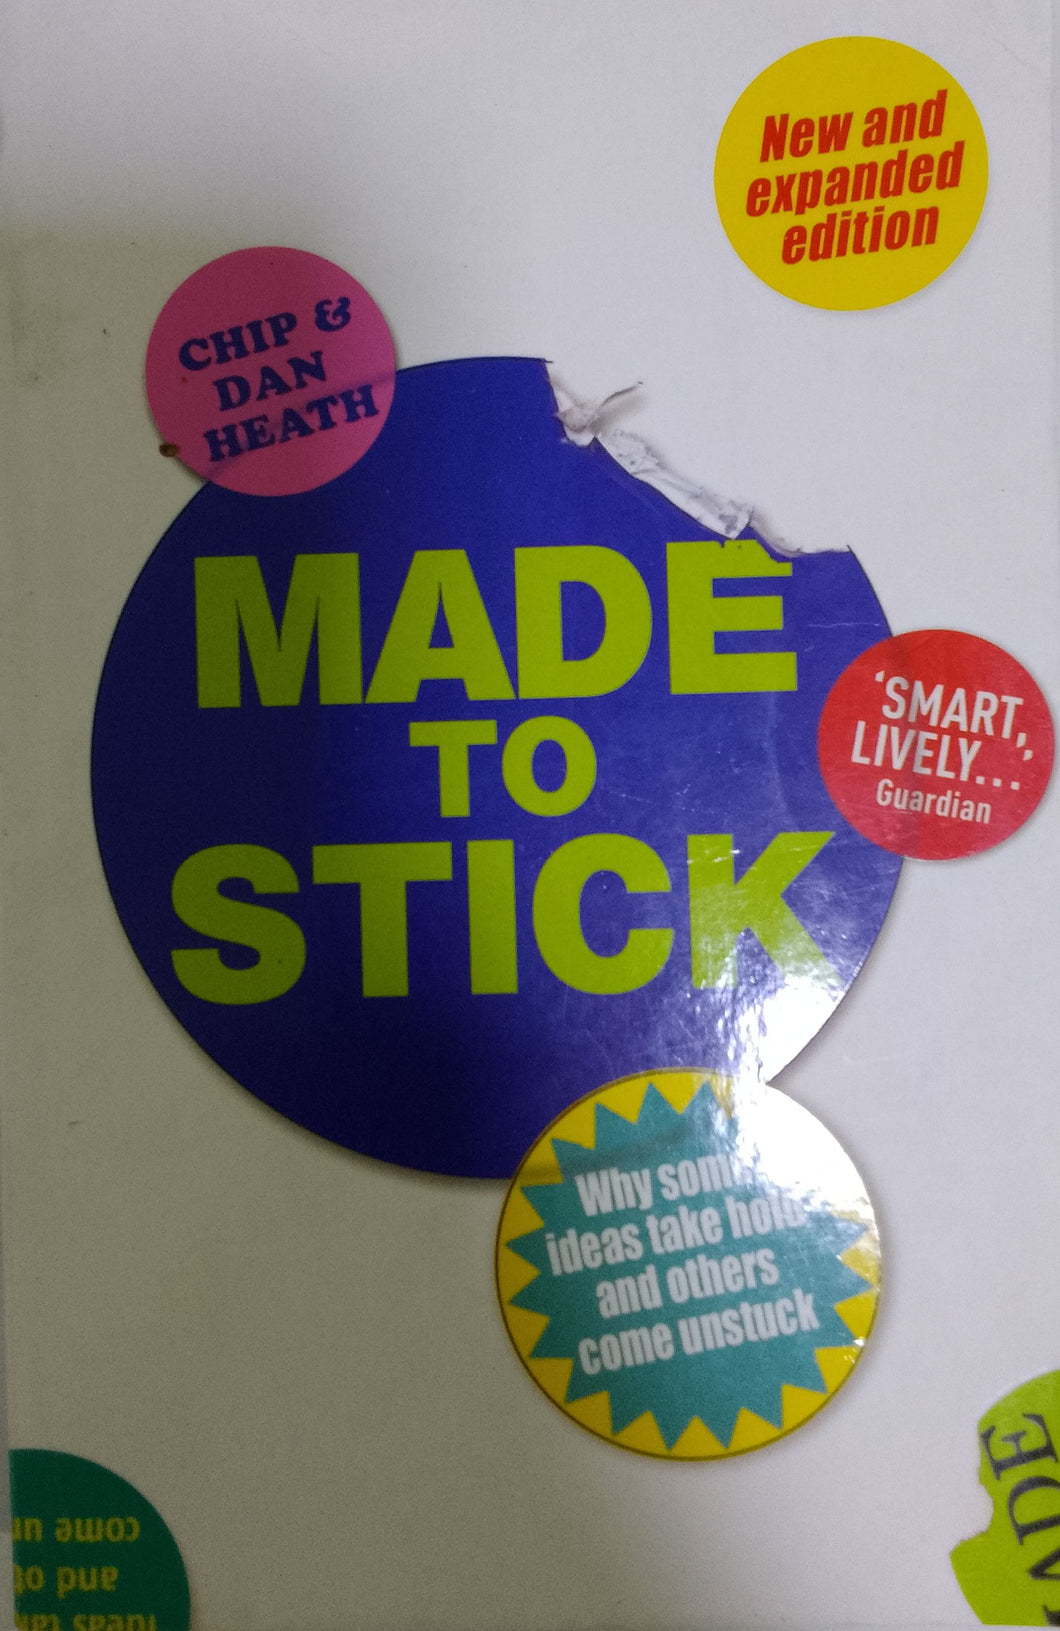 Made to Stick: Why some ideas take hold and others come unstuck